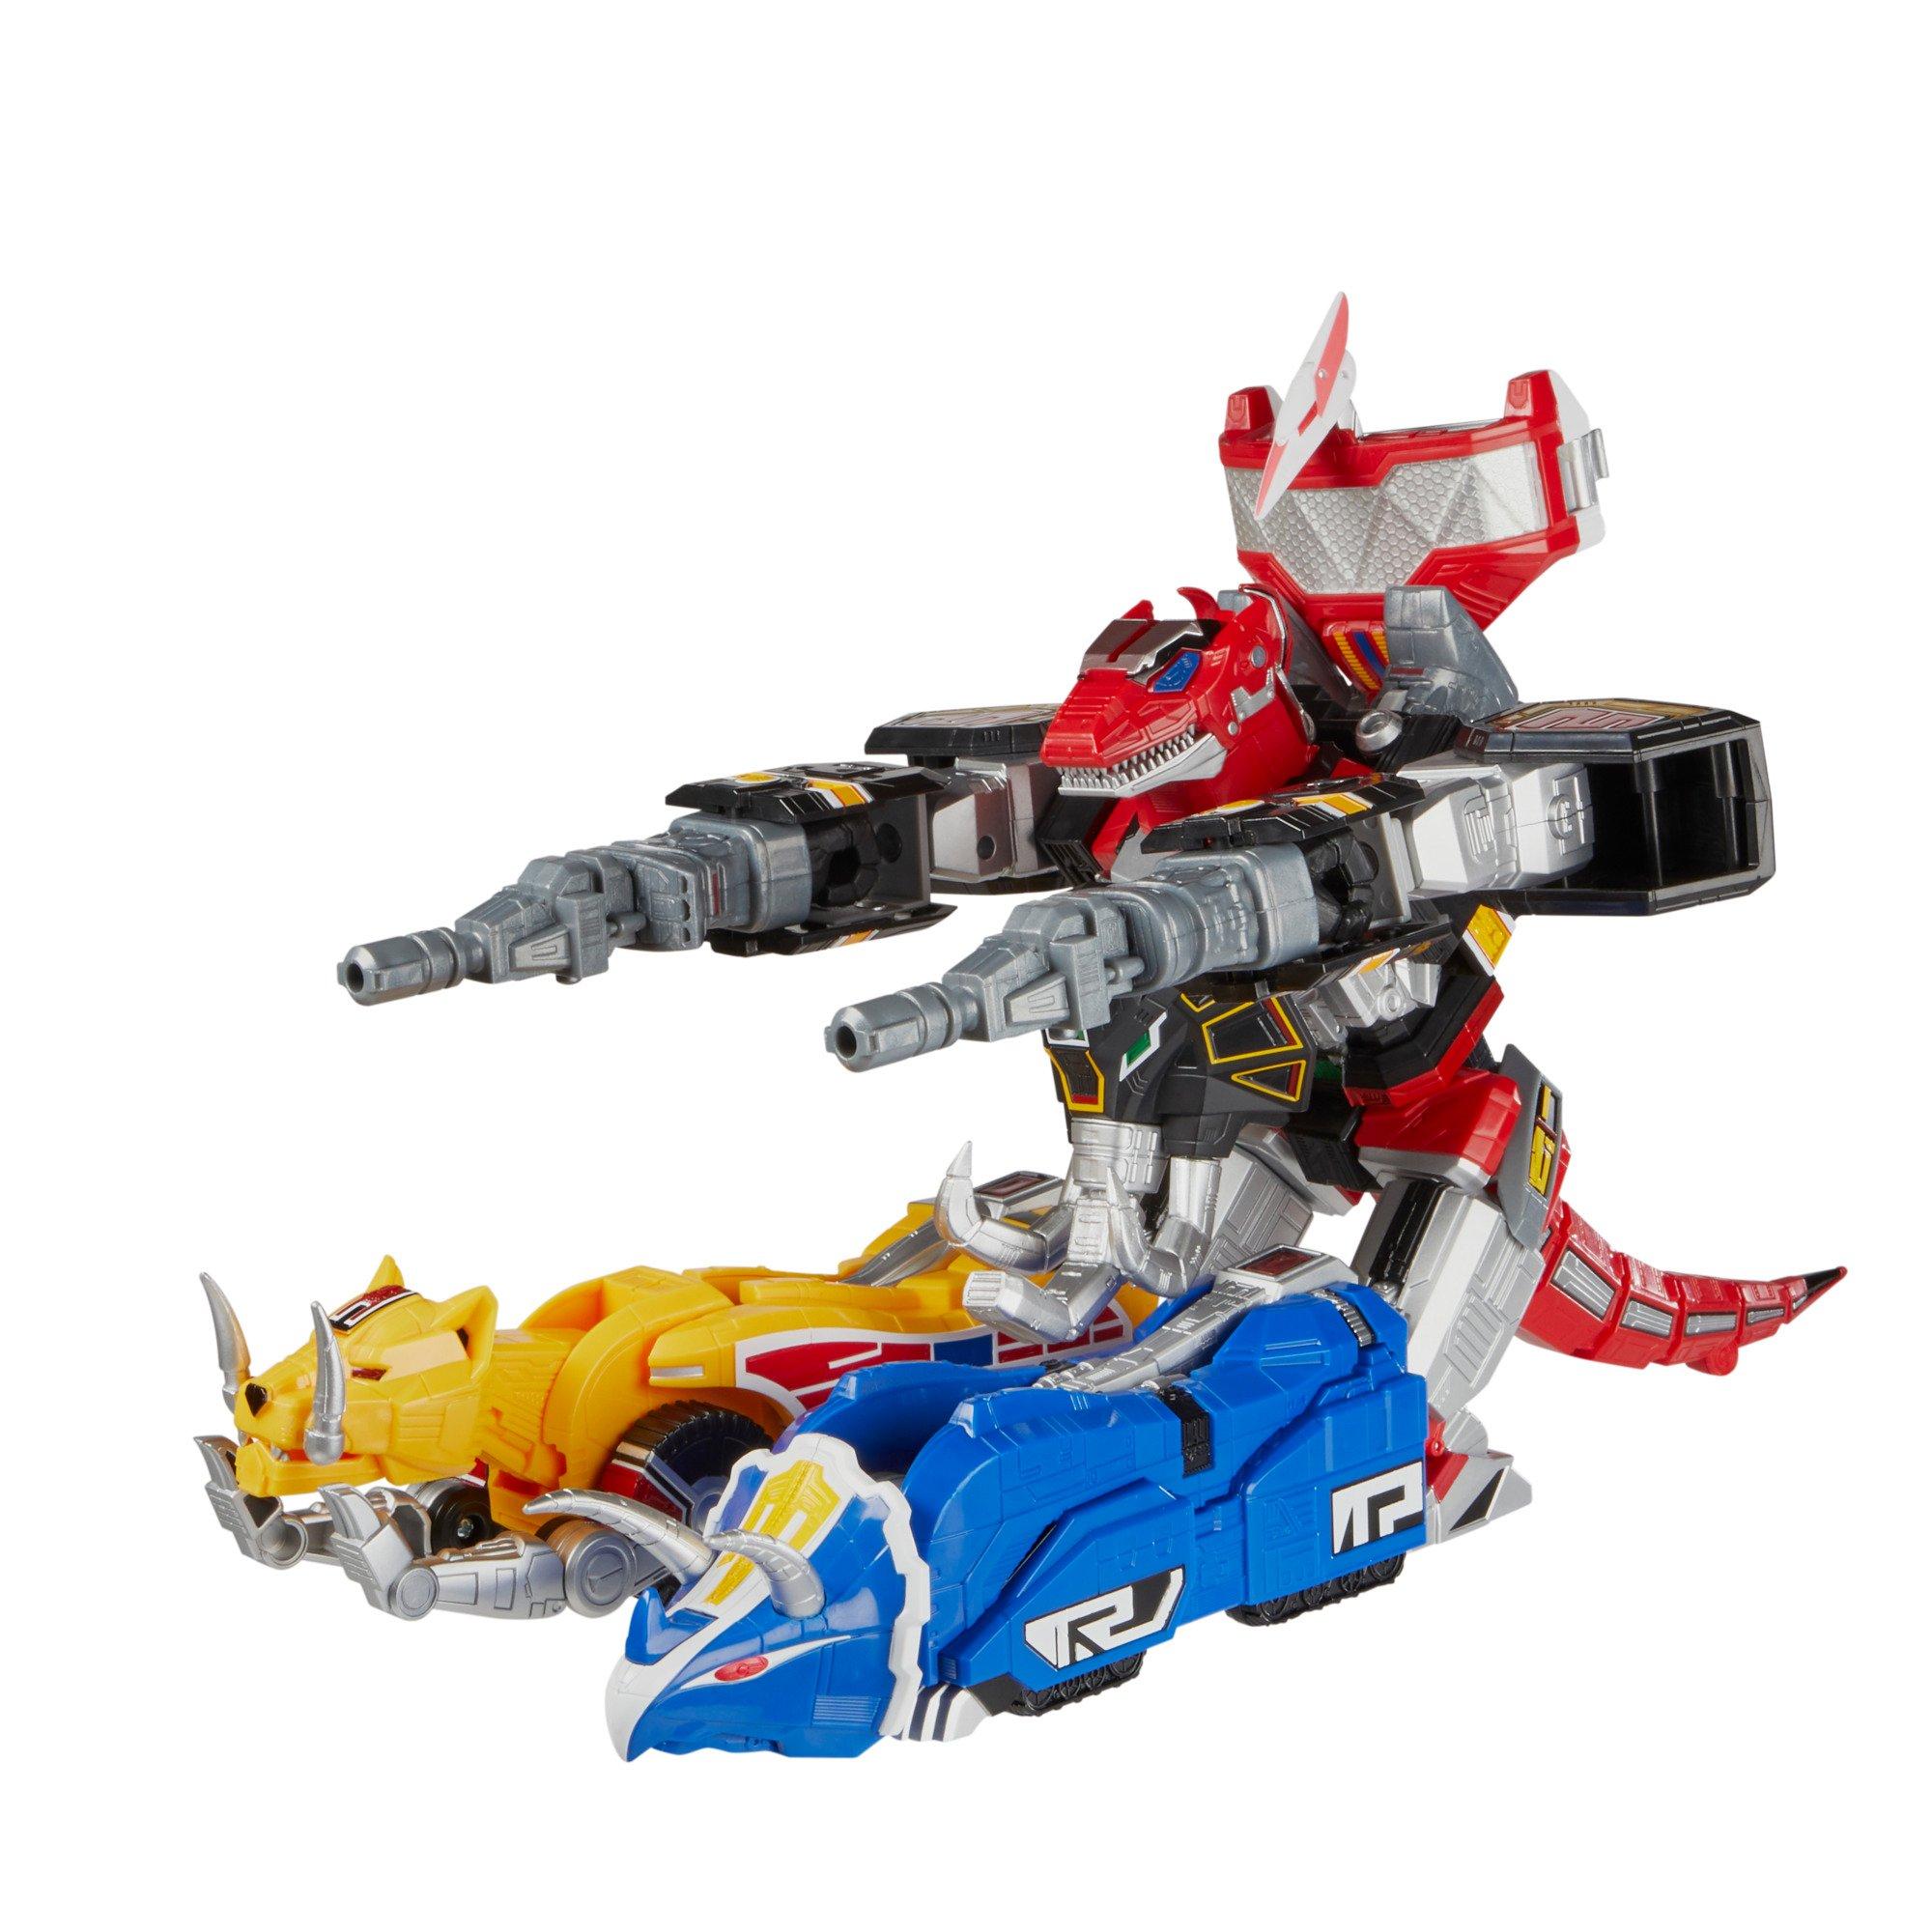 list item 3 of 16 Hasbro Mighty Morphin Power Rangers Zord Ascension Project Dino Megazord Action Figure